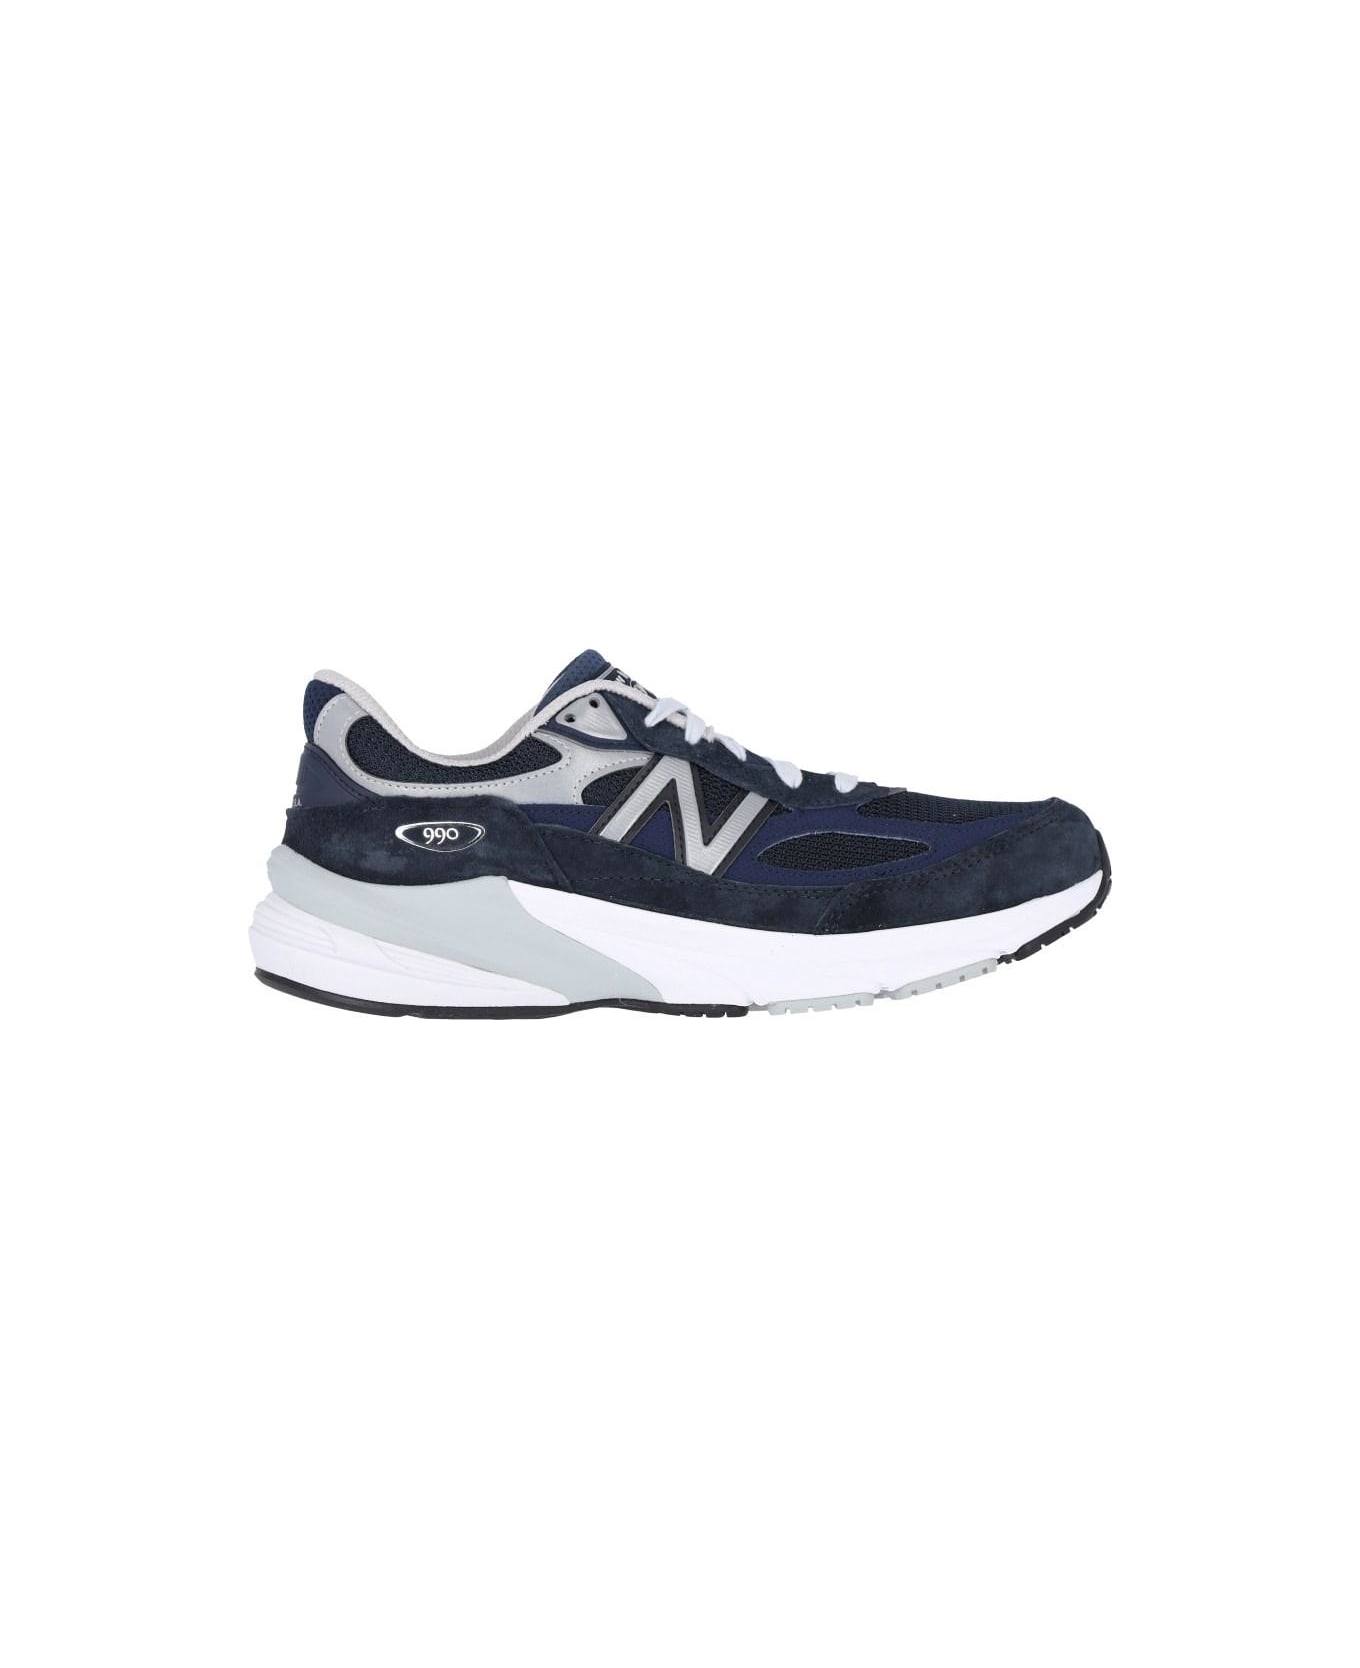 New Balance 'made In Usa 990v6' Sneakers - BLUE